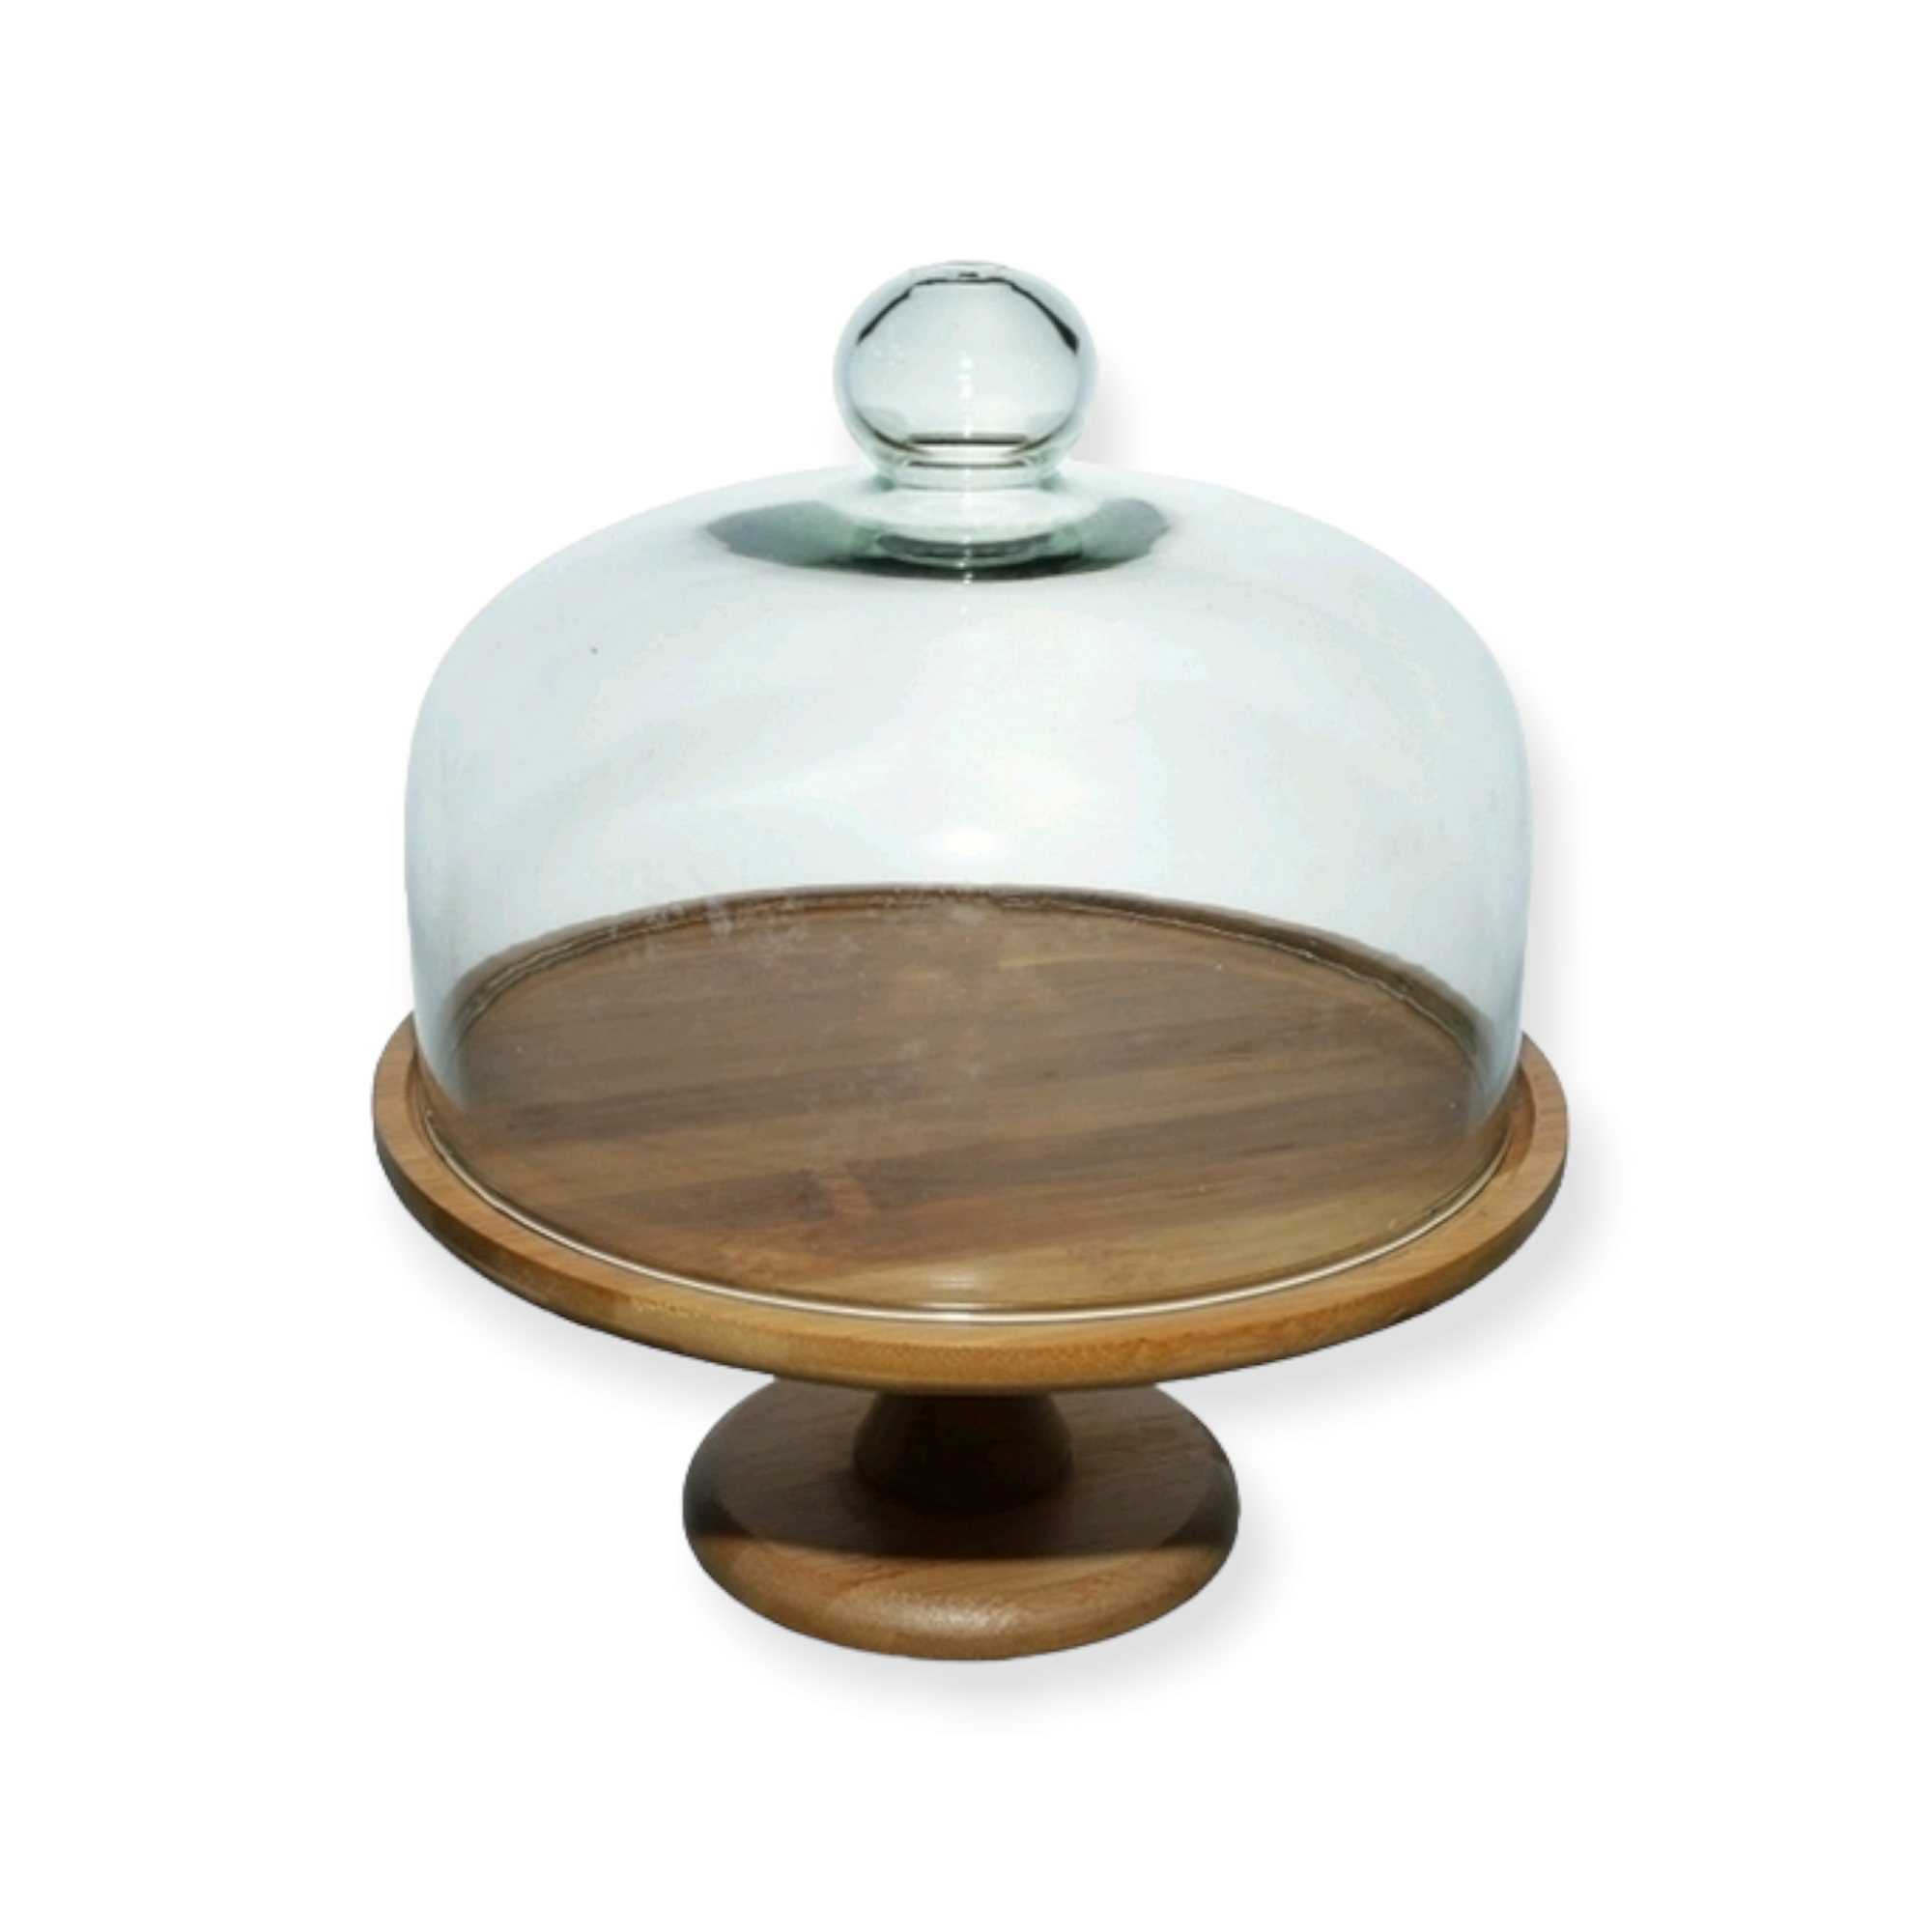 Patisserie Cake Dome Server 24cm with Acacia Wooden Base Footed Stand 34553